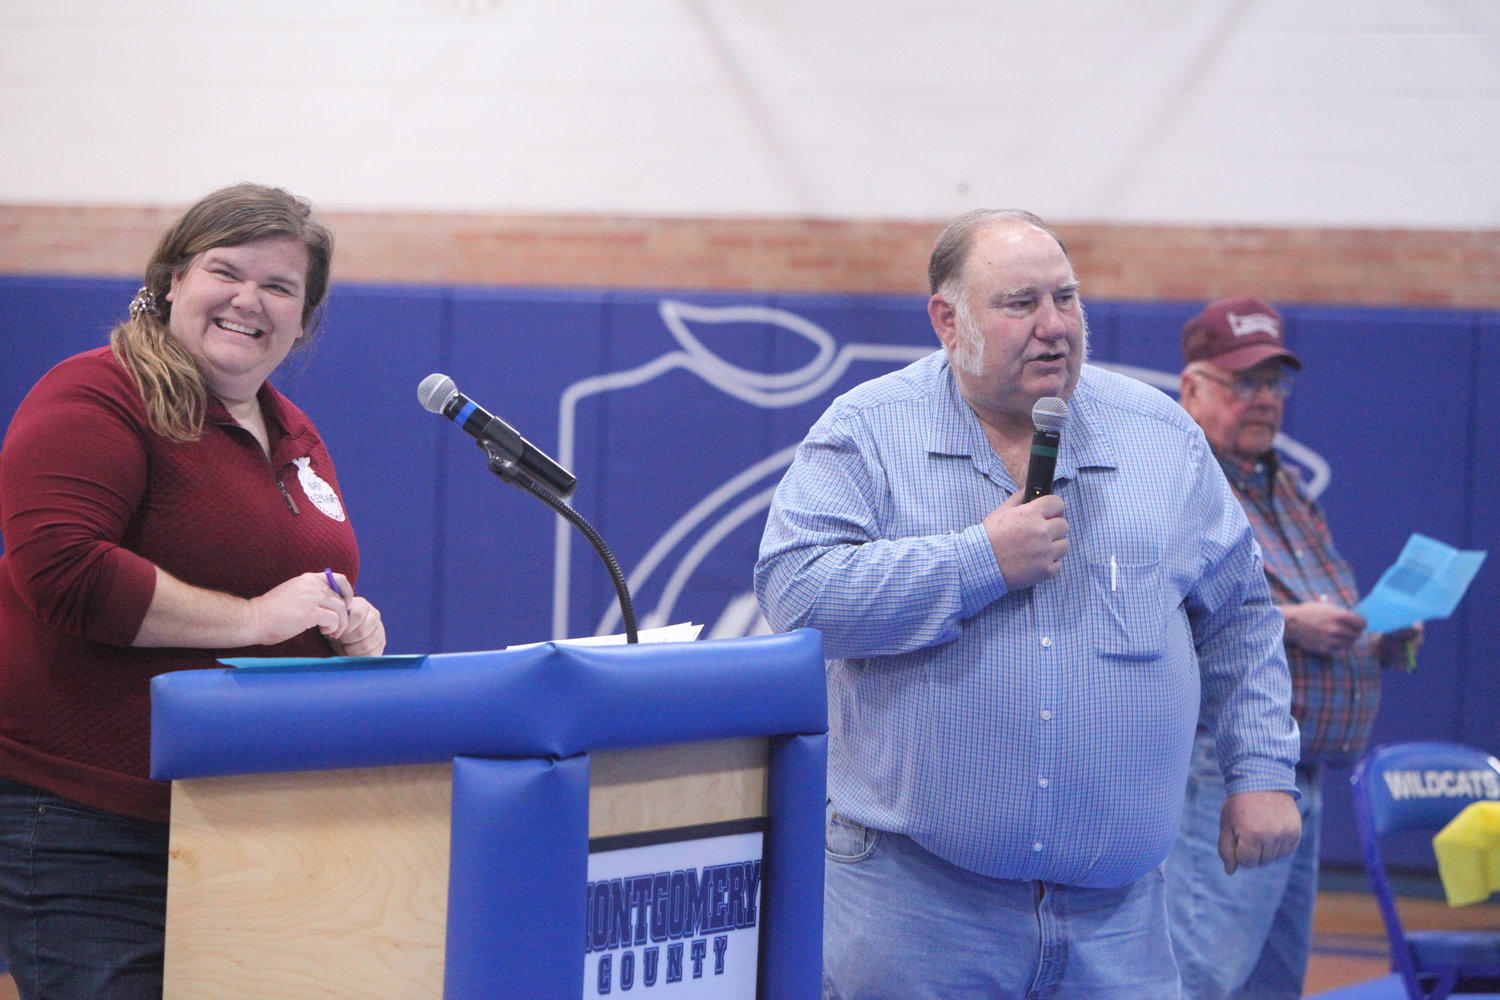 Charlie Korman (right) performs his duties as the auctioneer of the Montgomery County High School FFA Labor Auction on Nov. 18. On the left is FFA co-advisor Mary Leykamp.